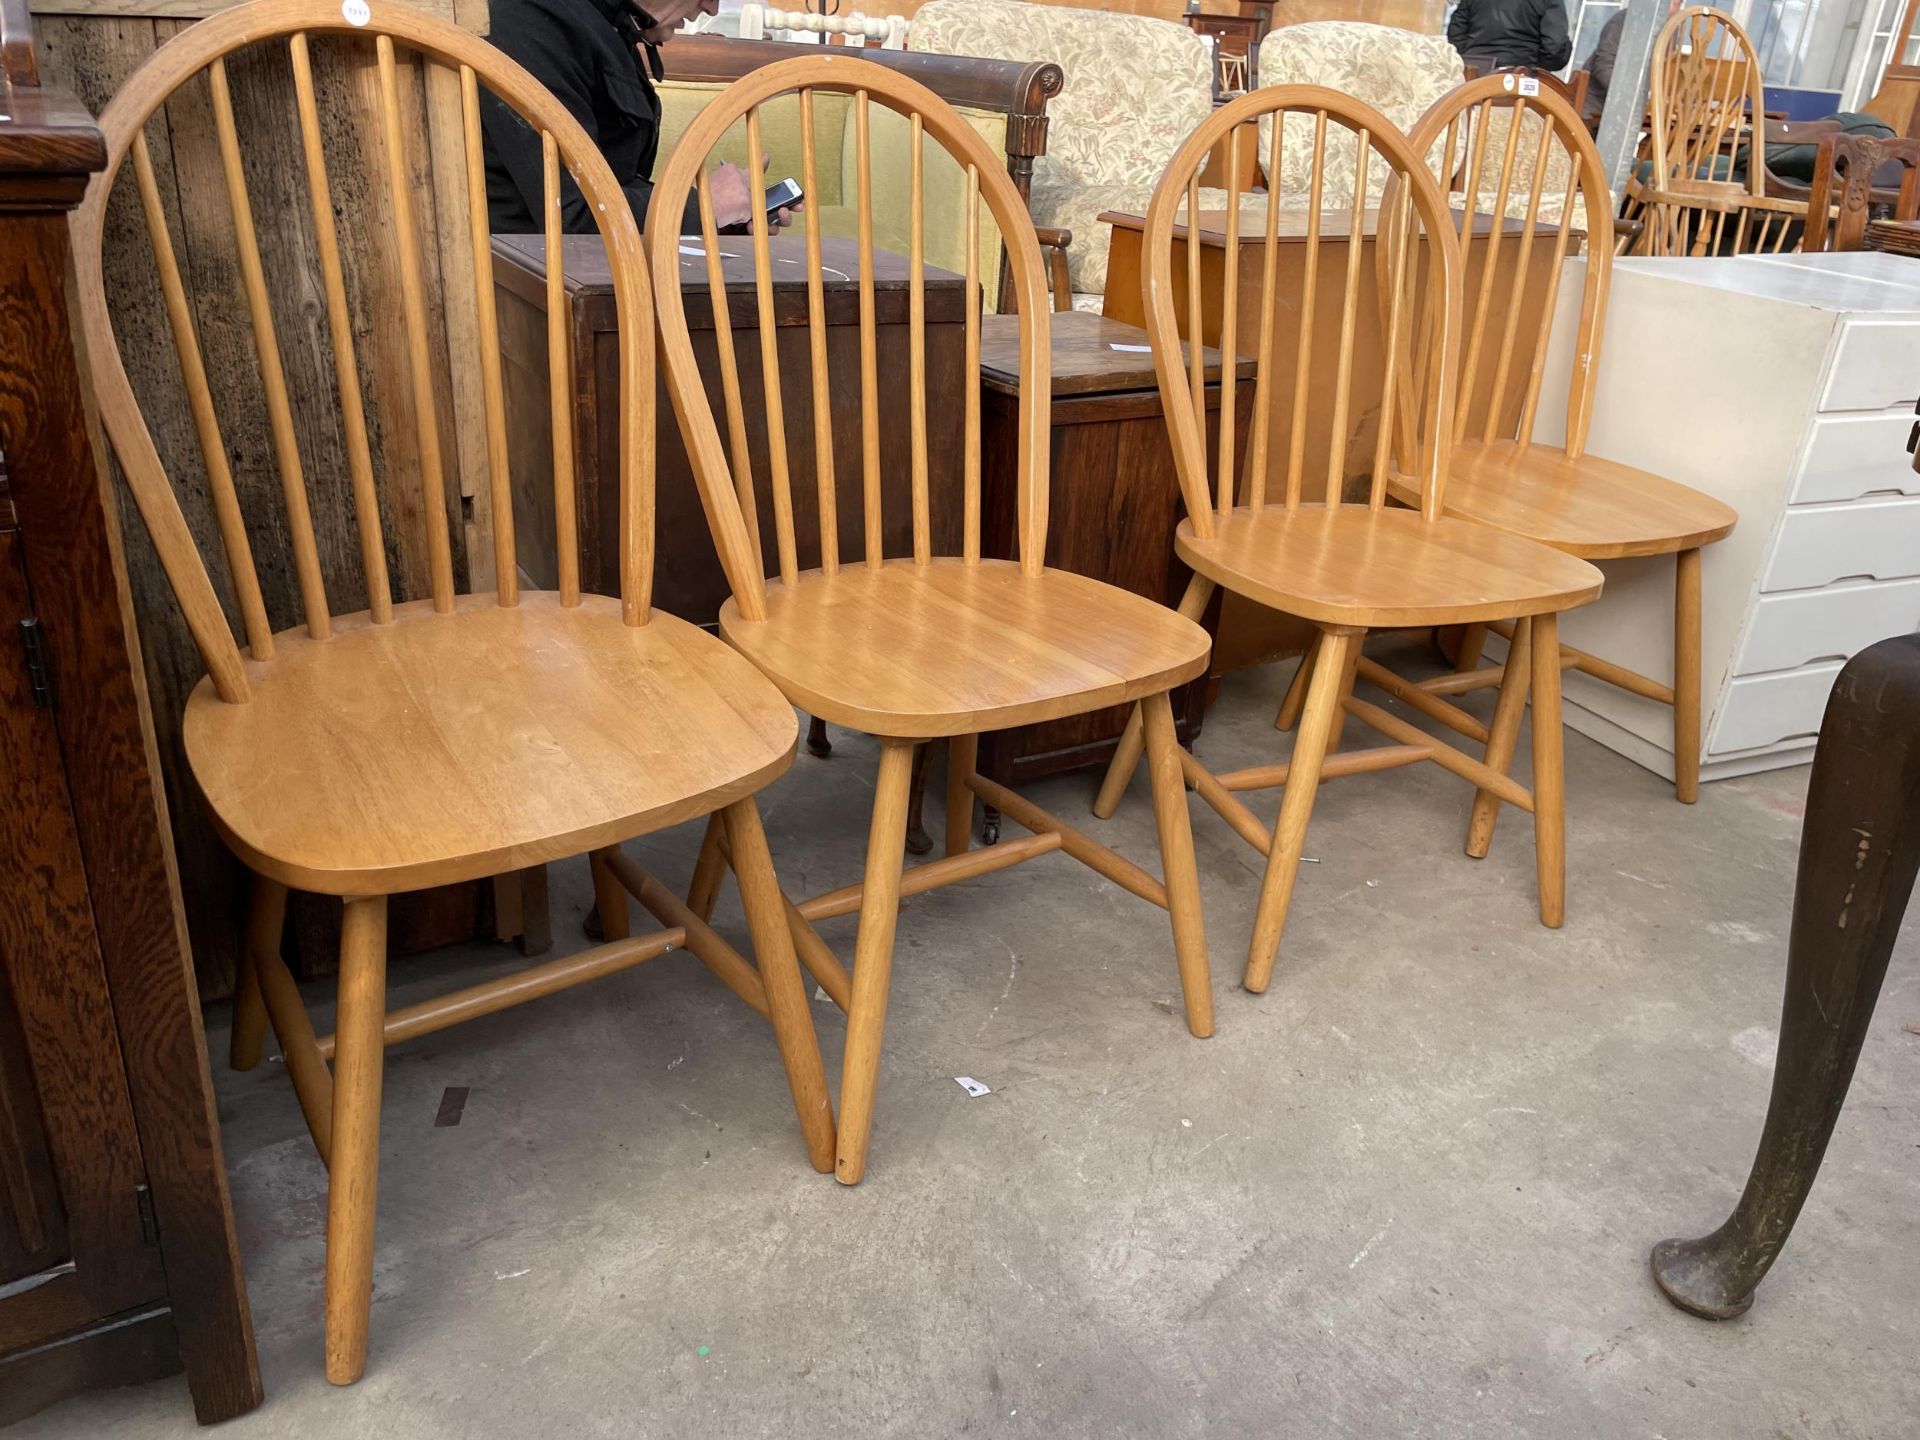 A SET OF FOUR WINDSOR STYLE KITCHEN CHAIRS - Image 2 of 2